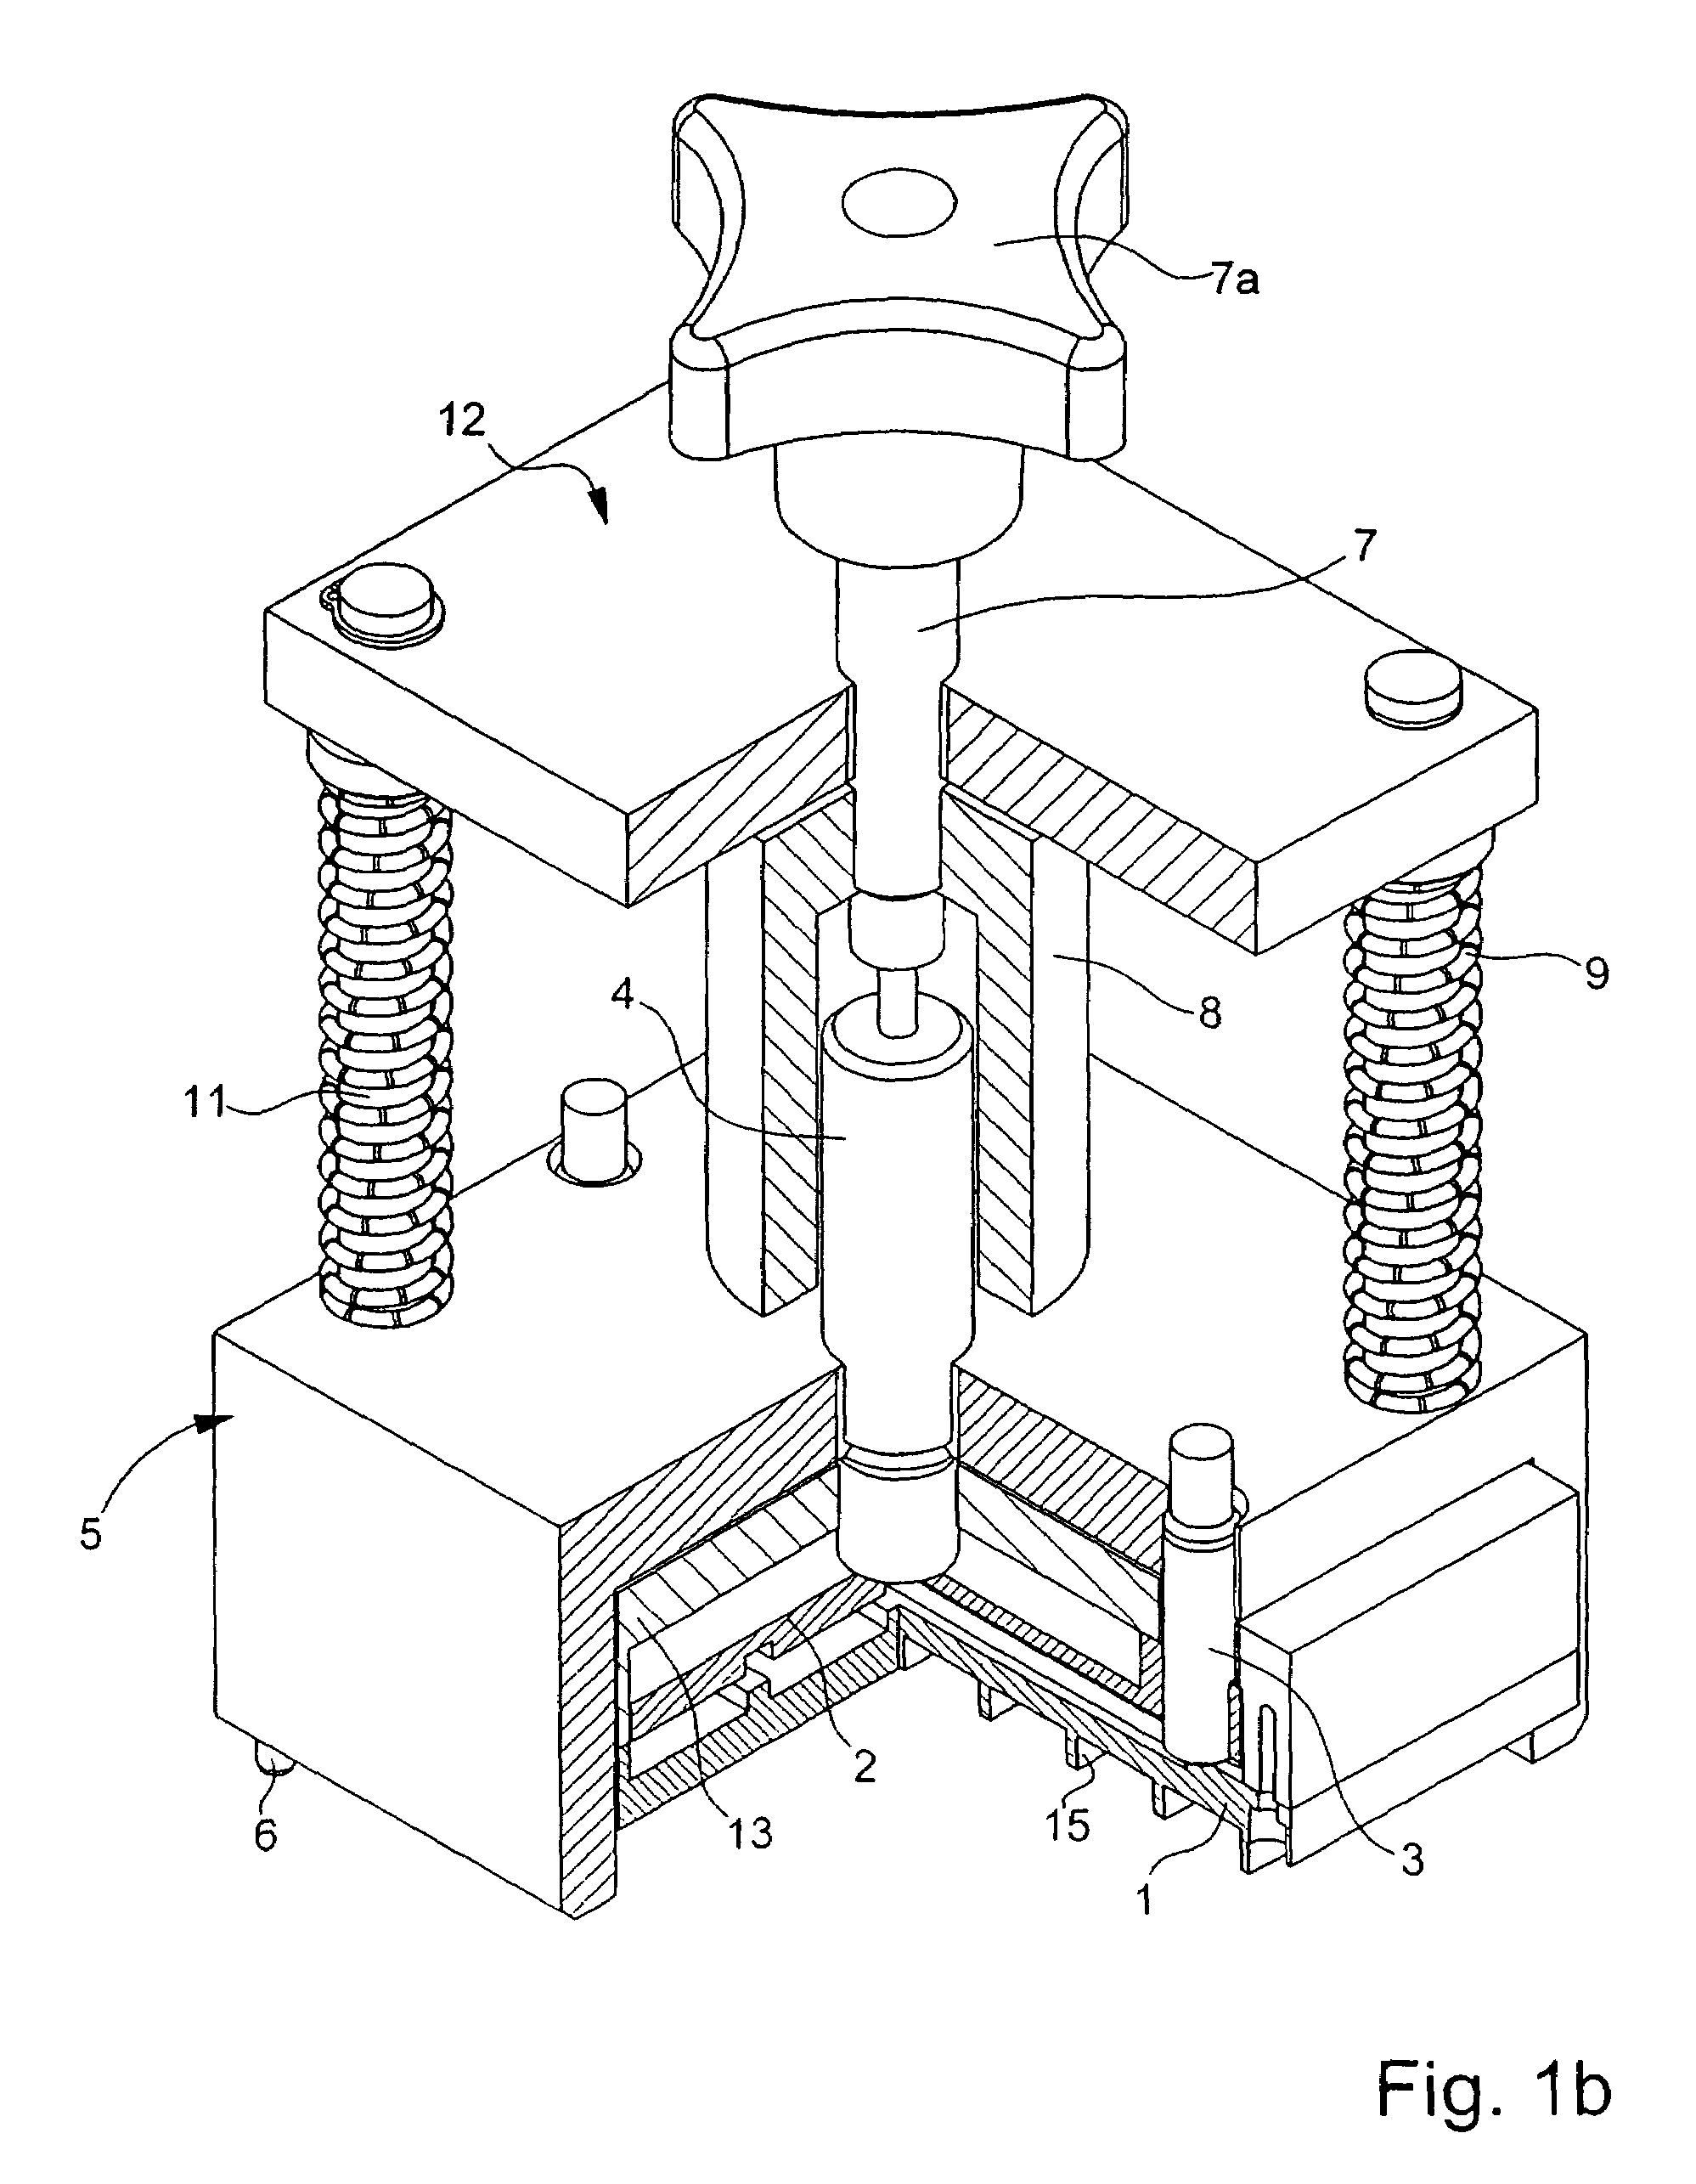 Device for positioning and affixing magnets to a magnetic yoke member of a motor